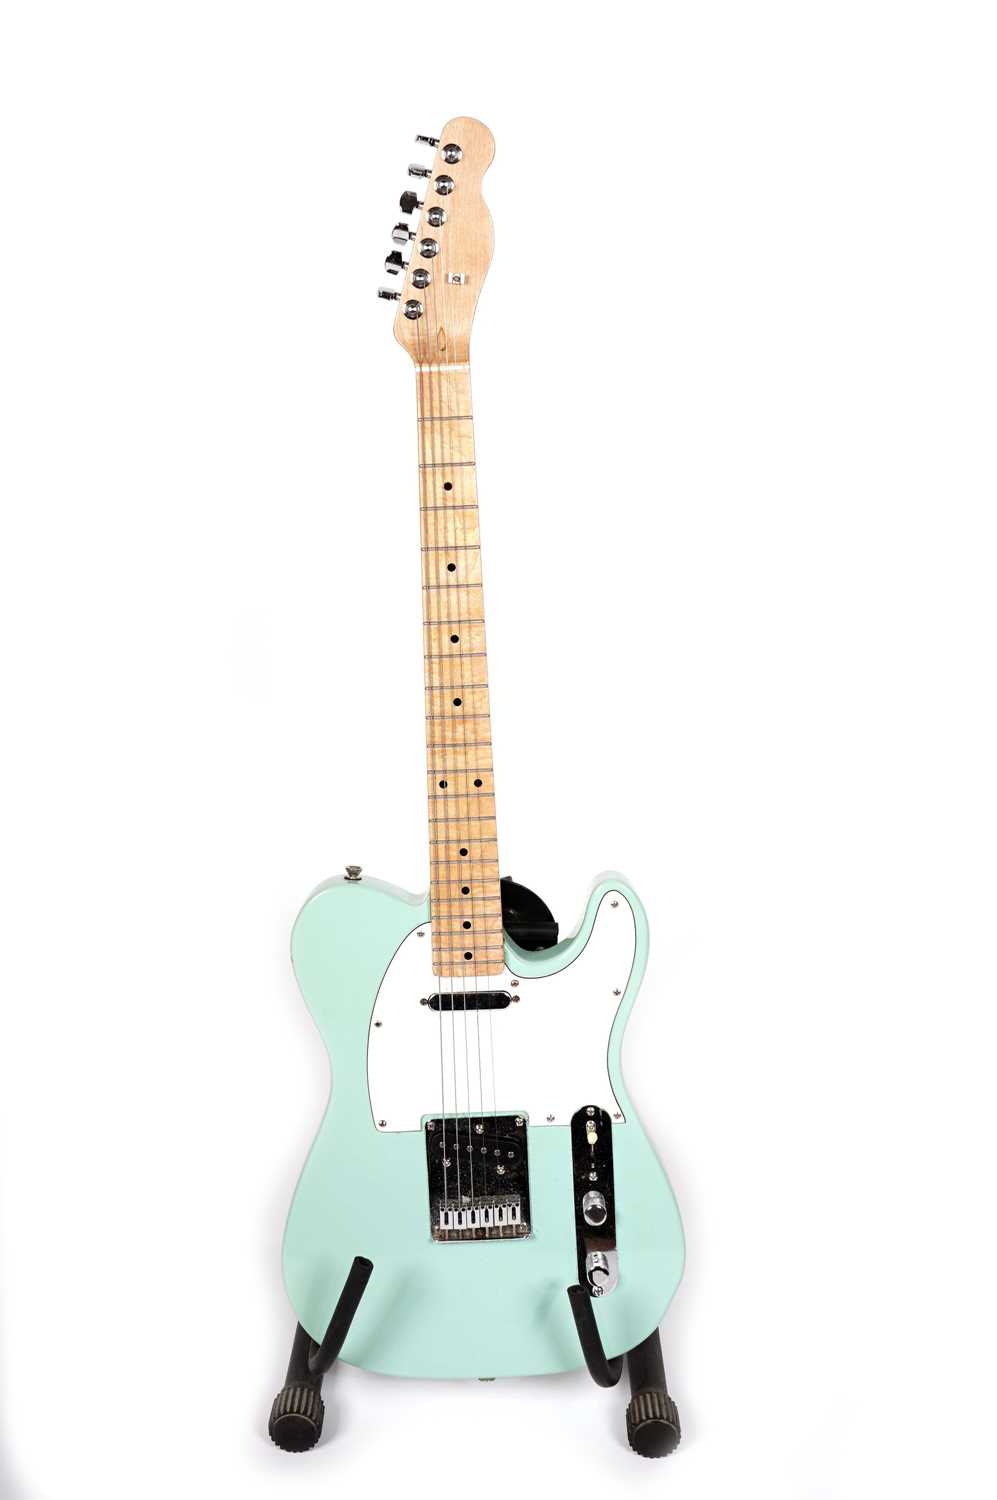 A Squier Telecaster electric guitar - Image 5 of 6